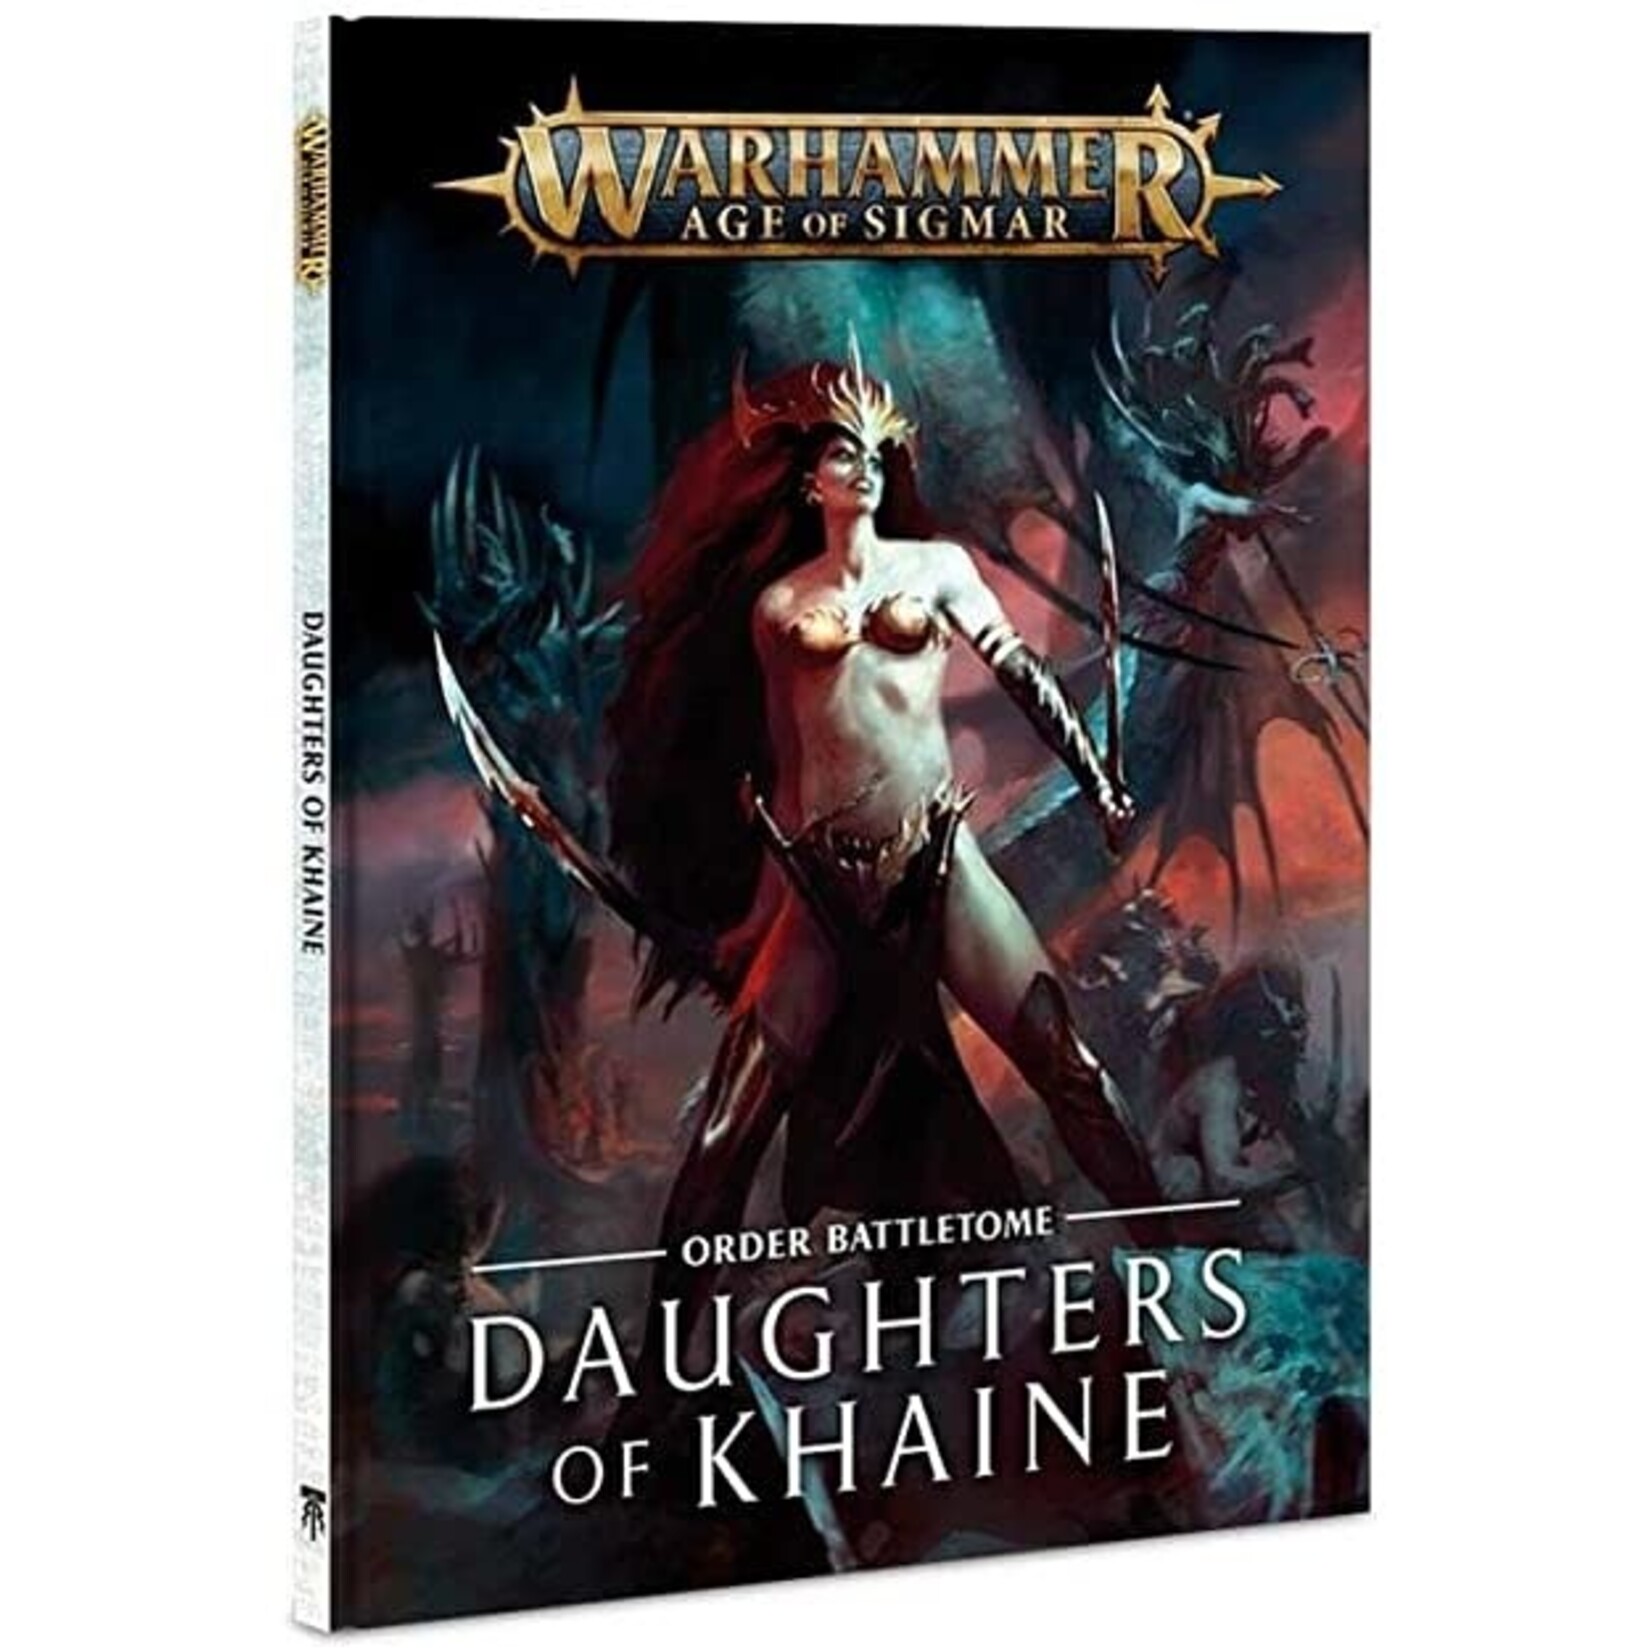 Games Workshop AoS: Daughters of Khaine